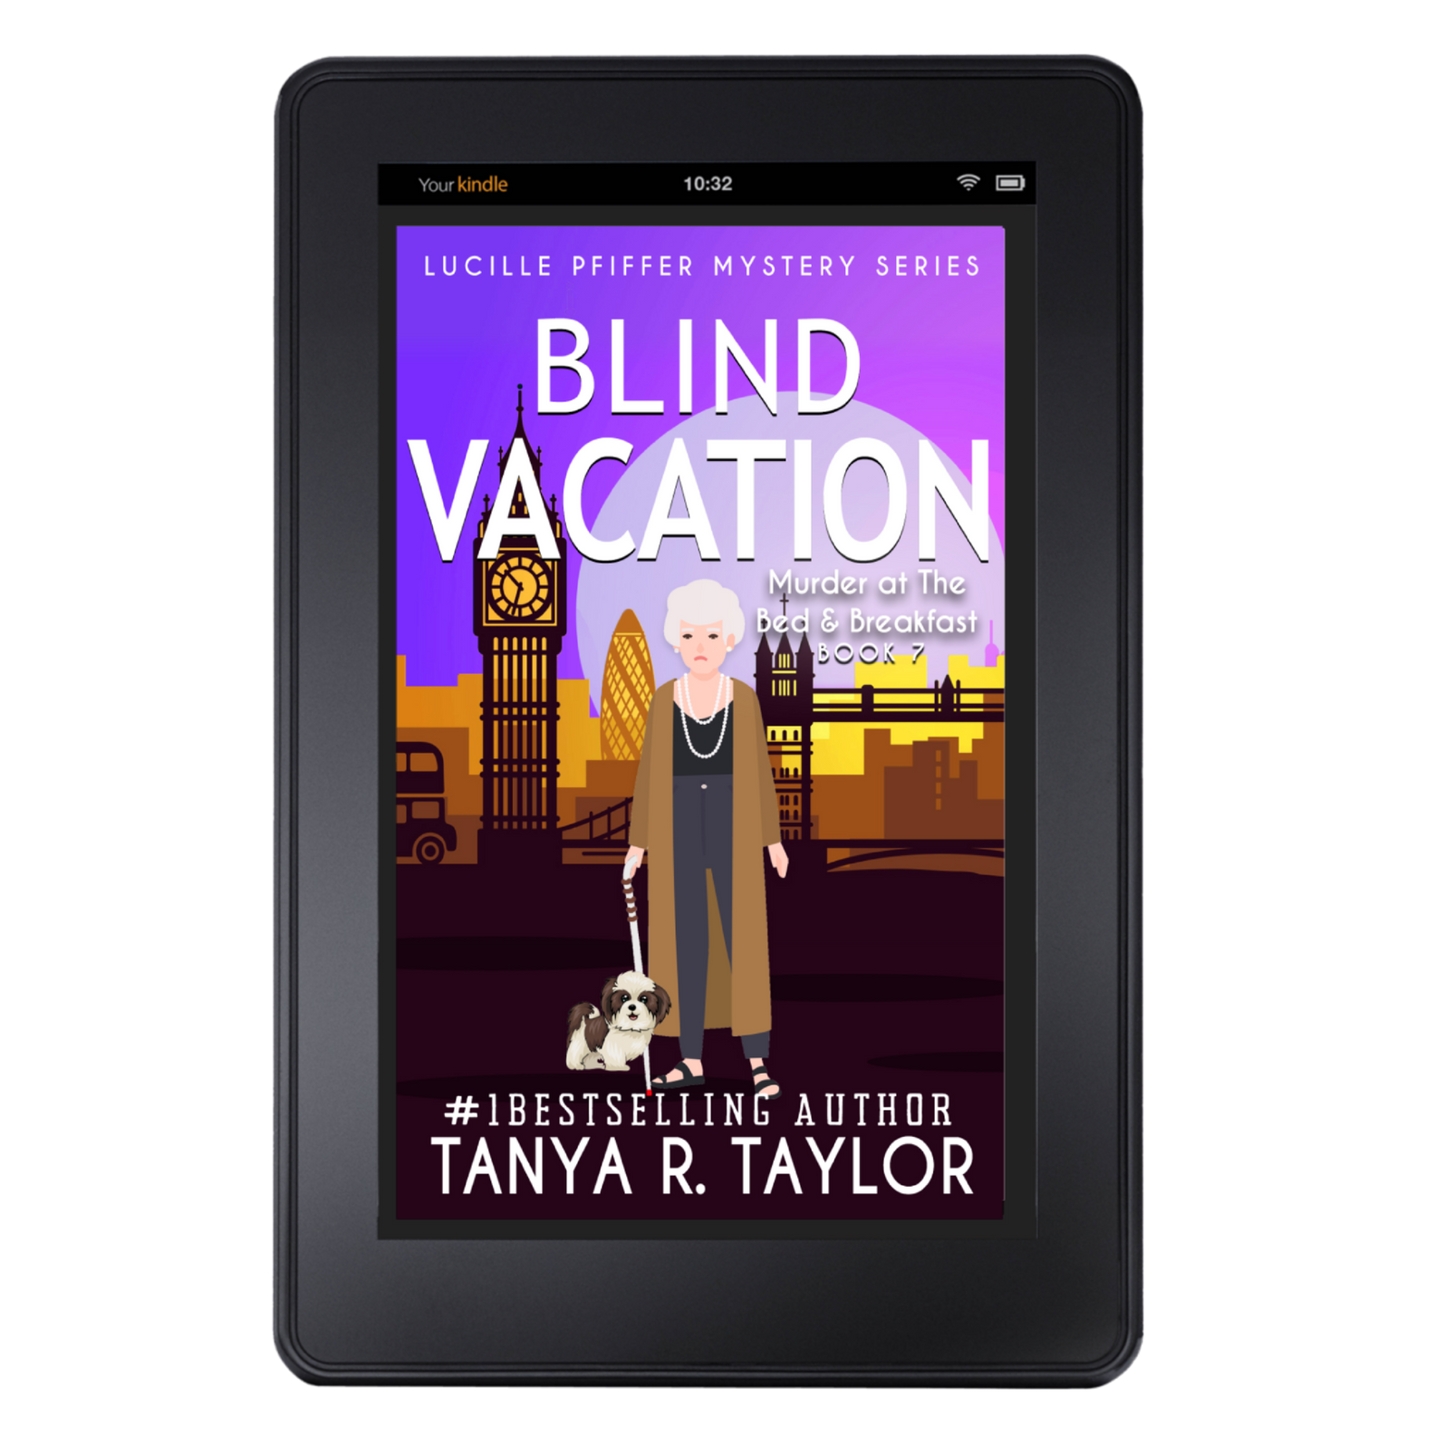 (Ebook) BLIND VACATION: MURDER AT THE BED & BREAKFAST (Lucille Pfiffer Mystery Series) Book 7